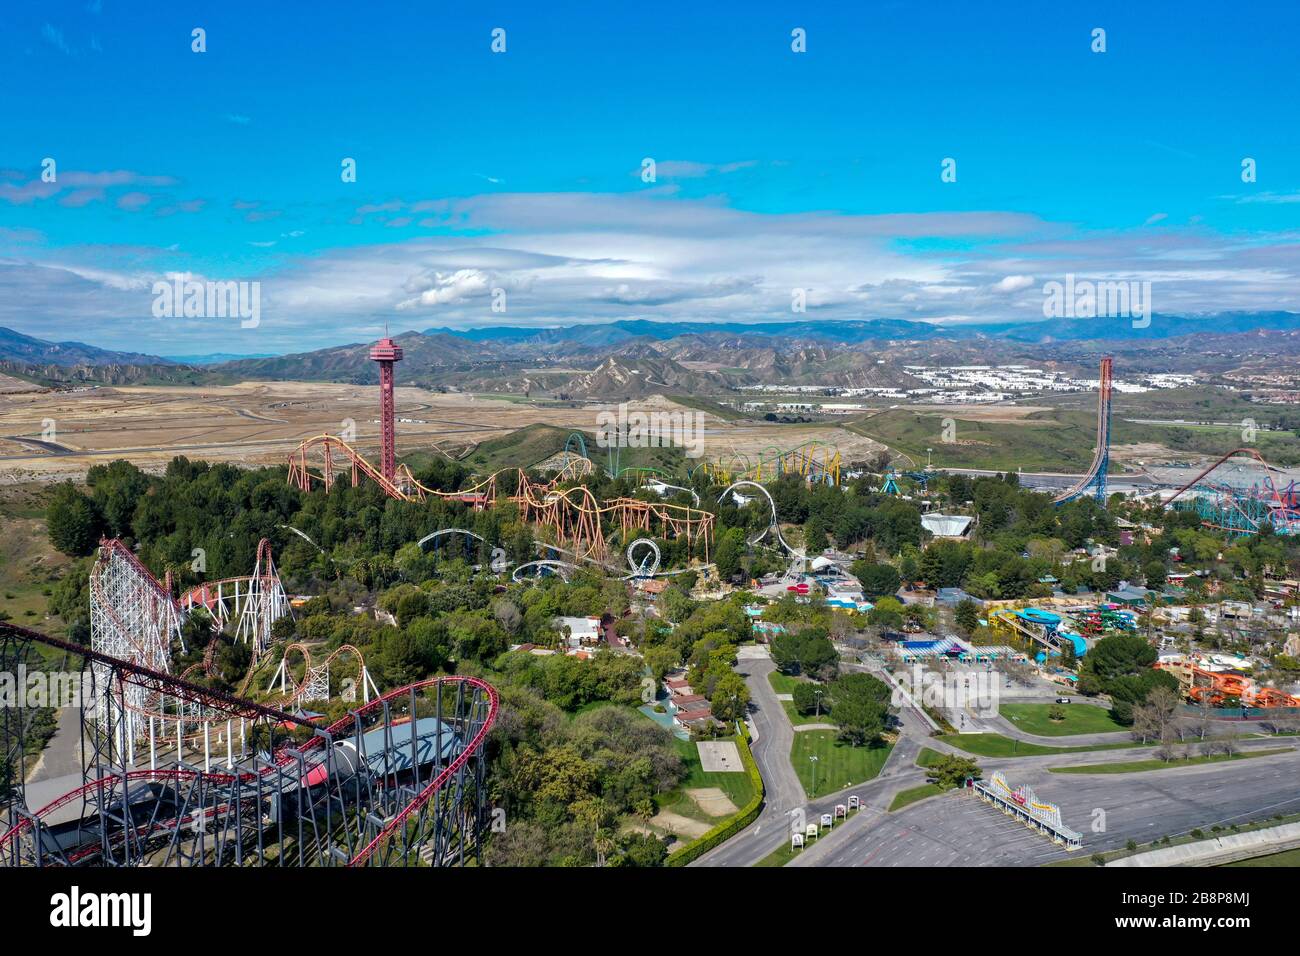 Valencia, California, USA, March 22, 2020. Aerial view of Six Flags Magic Mountain Valencia theme park, vacant of people, staff and rides shut down Stock Photo